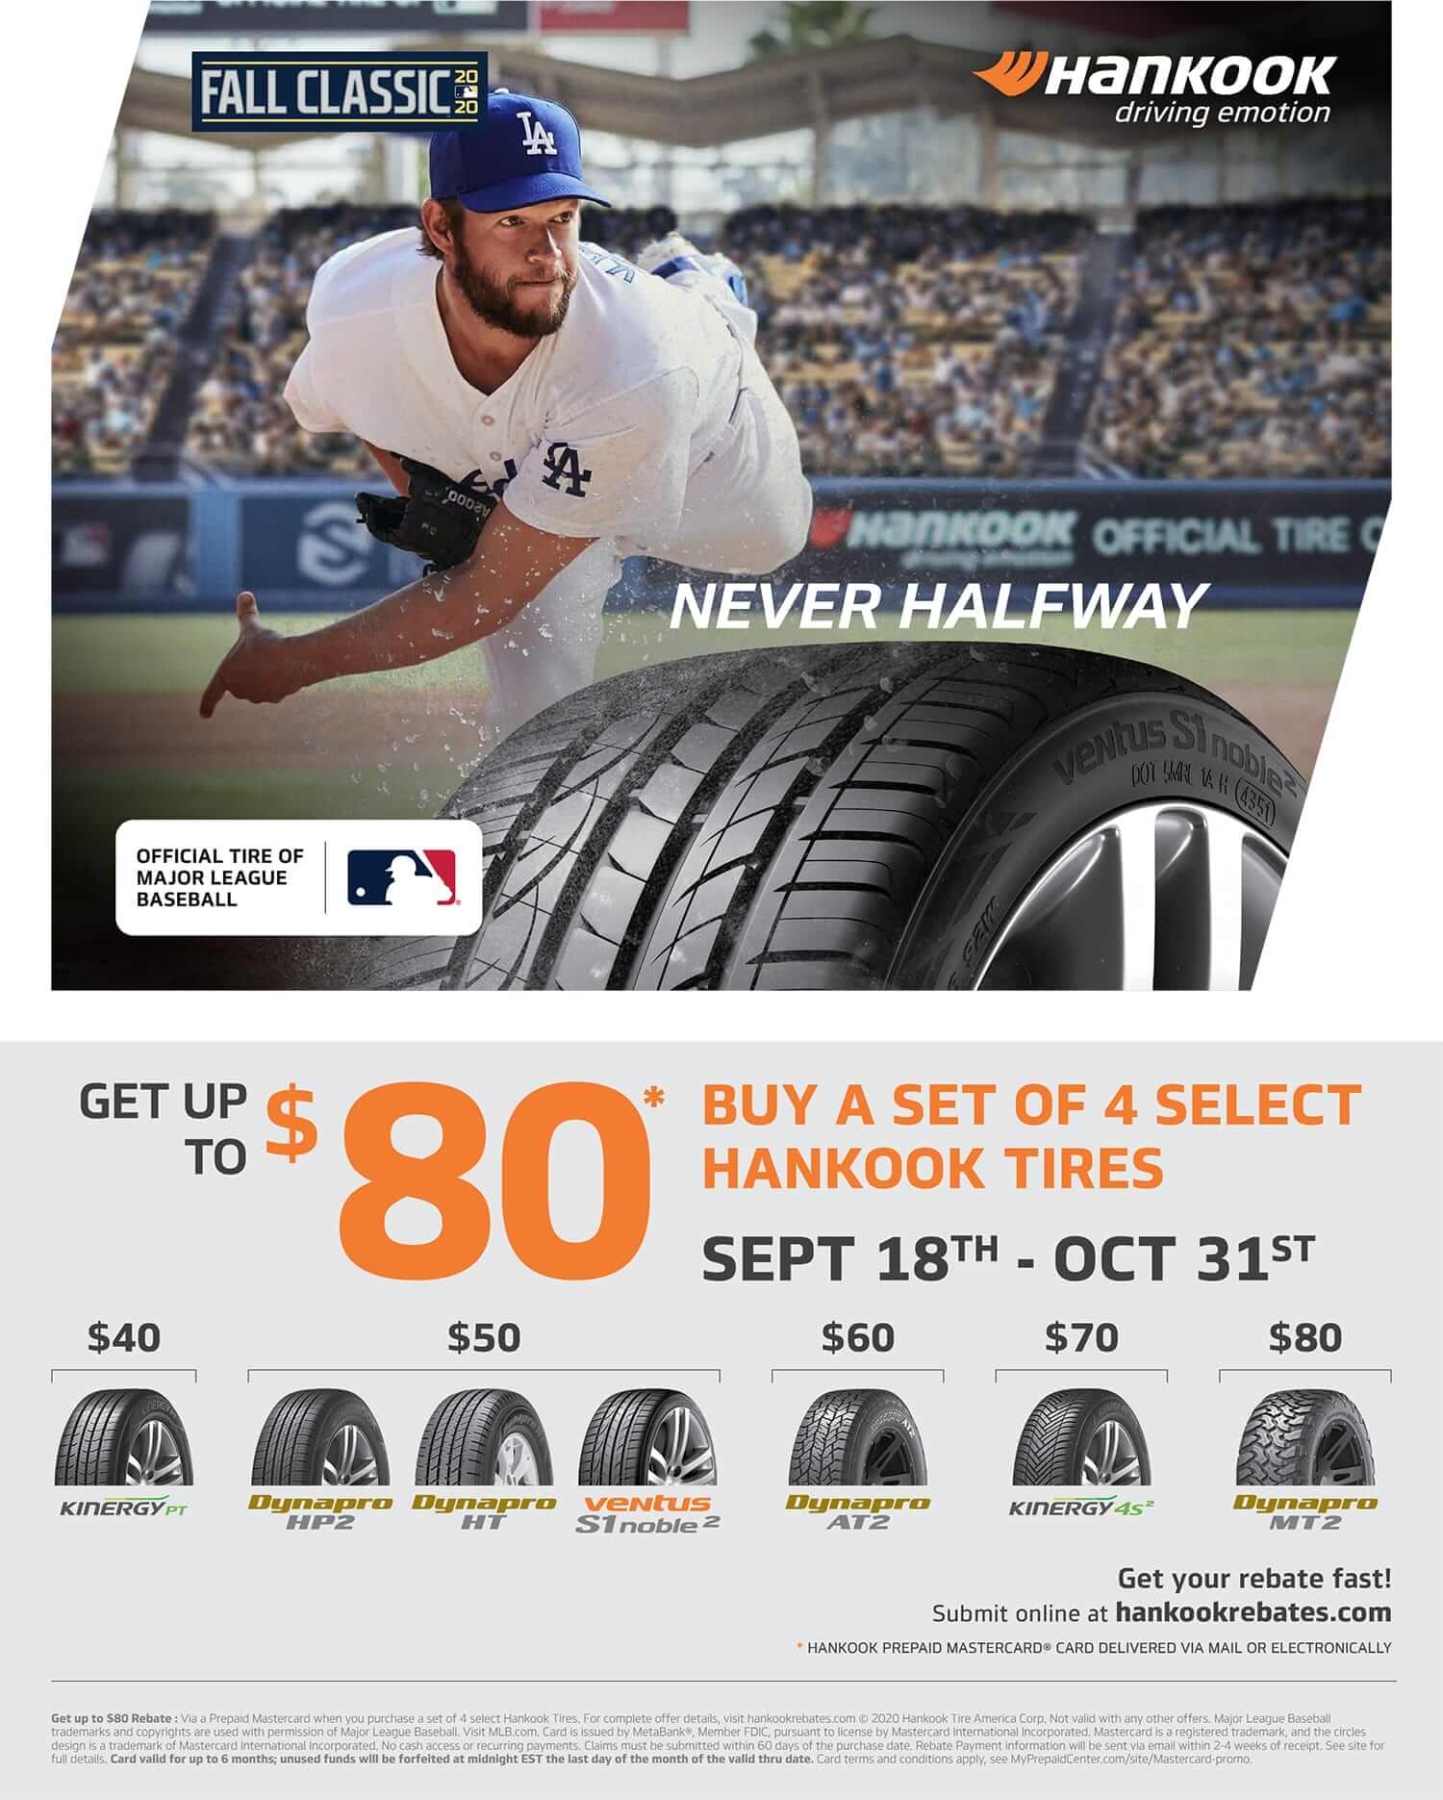 hankook-tire-promotion-save-up-to-80-after-mail-in-rebate-kubly